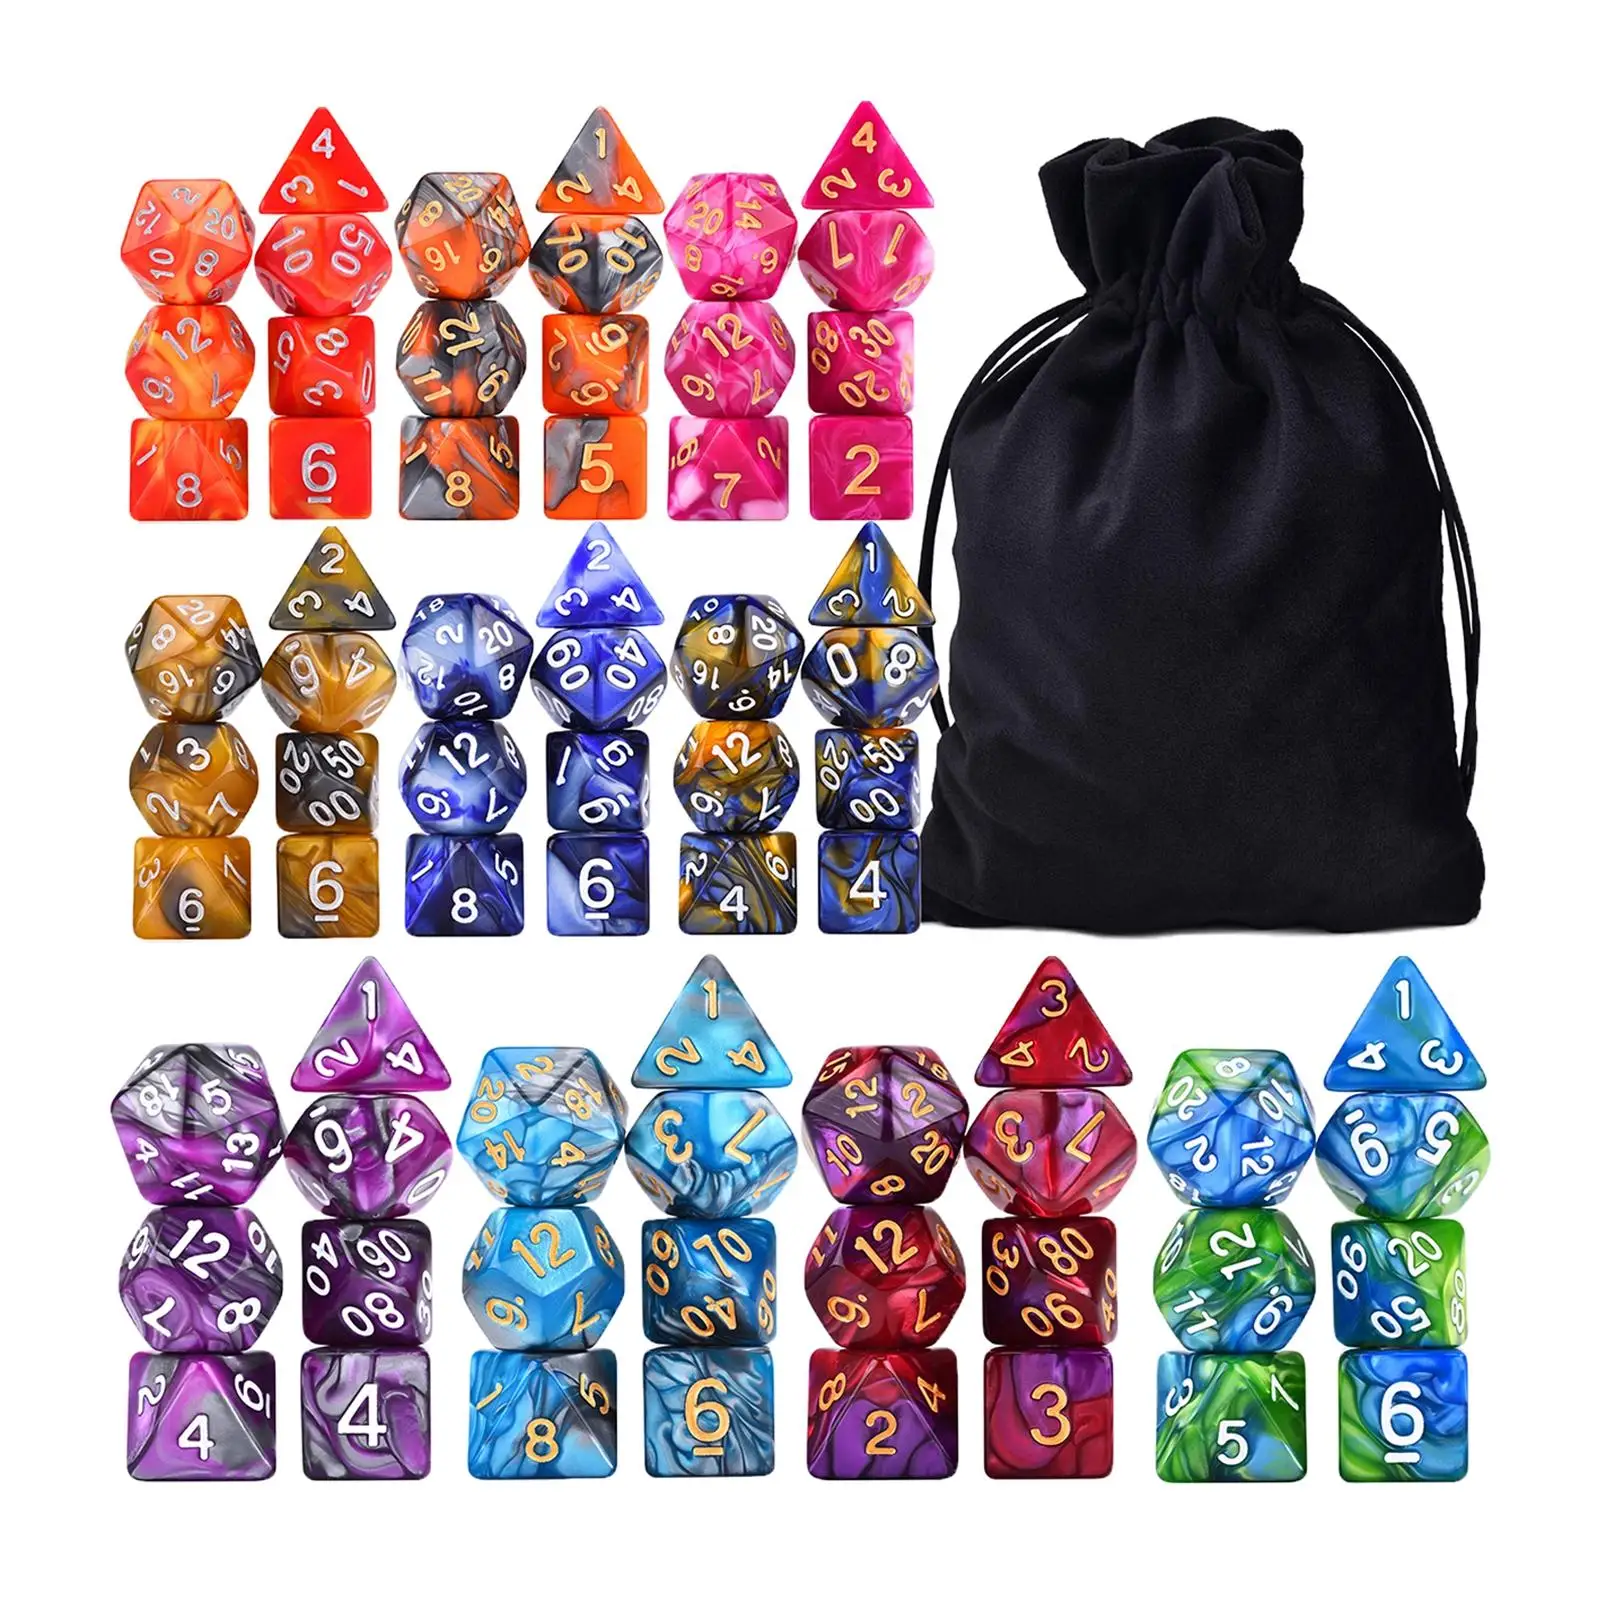 70 Pieces Role Playing Game Dices Set D4 D6 D8 D10 D12 D20 Acrylic Polyhedral Dice Set for DND MTG RPG Board Game Casino Game